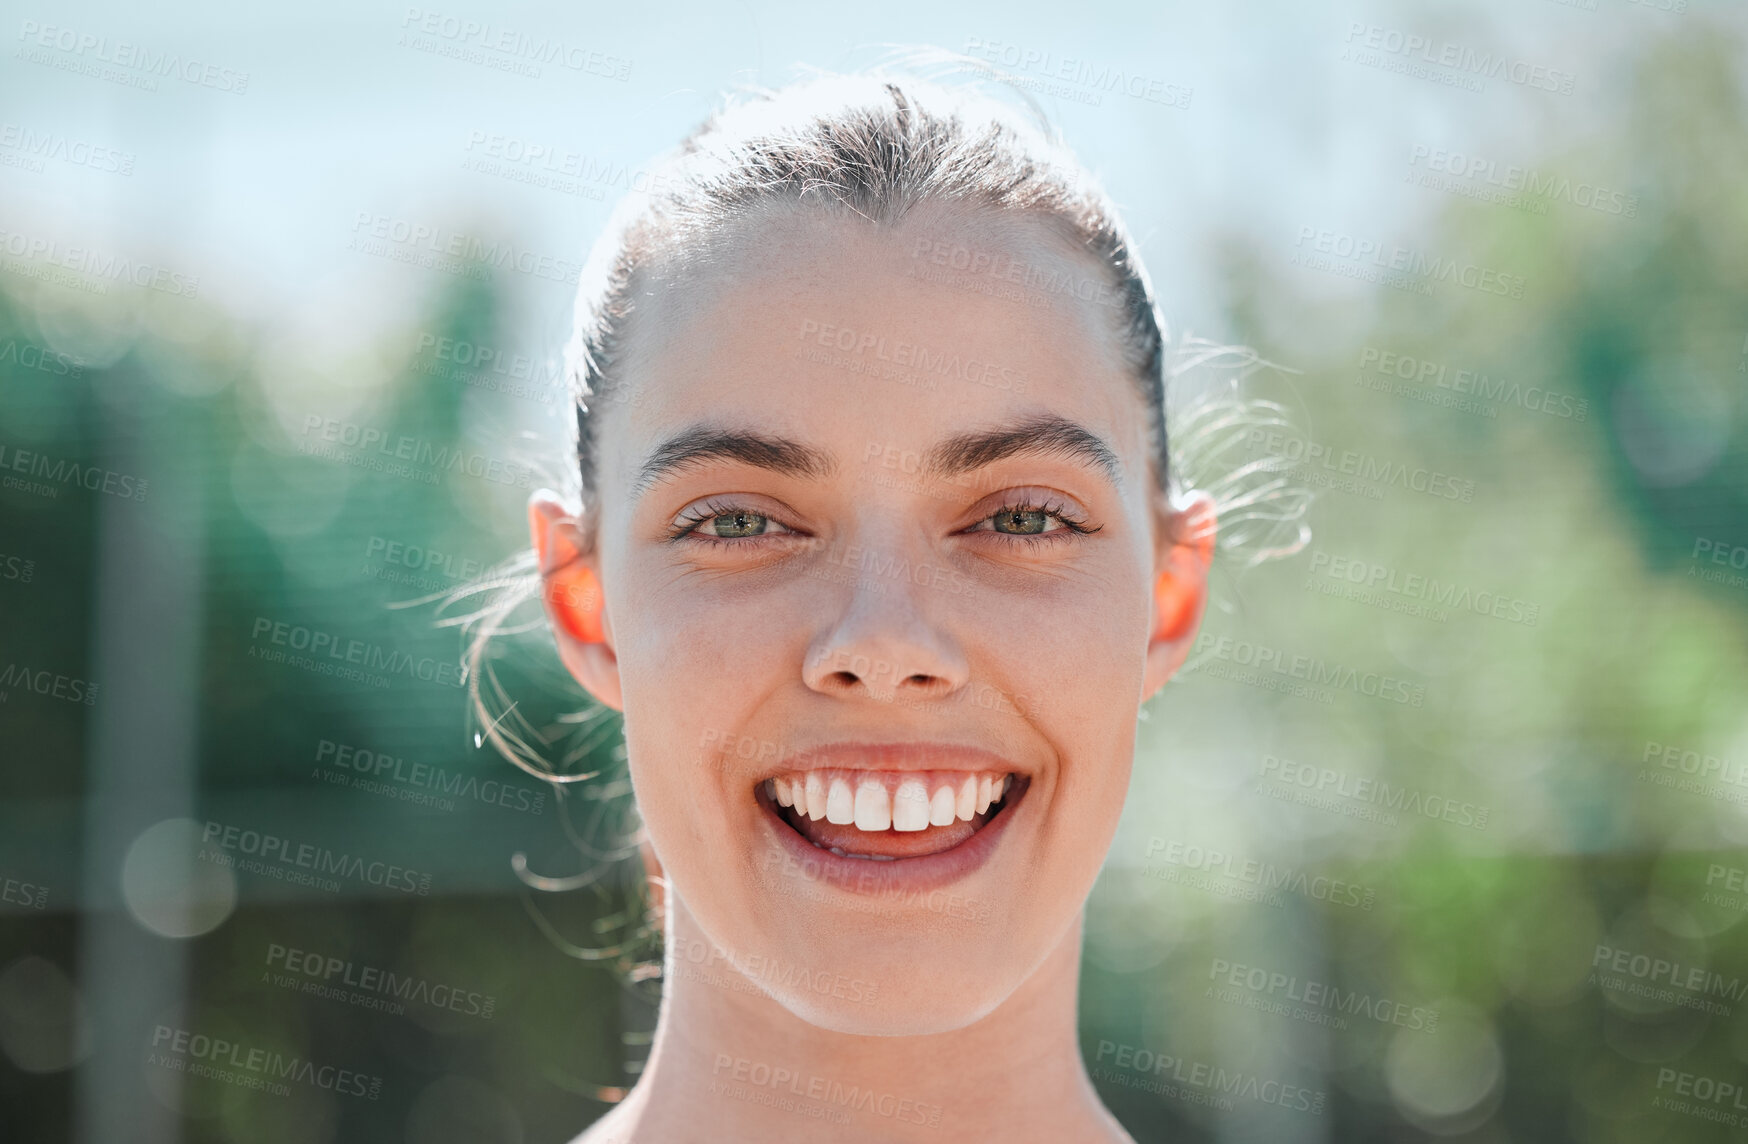 Buy stock photo Happy, woman and summer zoom portrait with excited smile on face for vacation adventure in Brazil. Wellness, happiness and good mental health of real girl enjoying outdoor sunshine on holiday.

